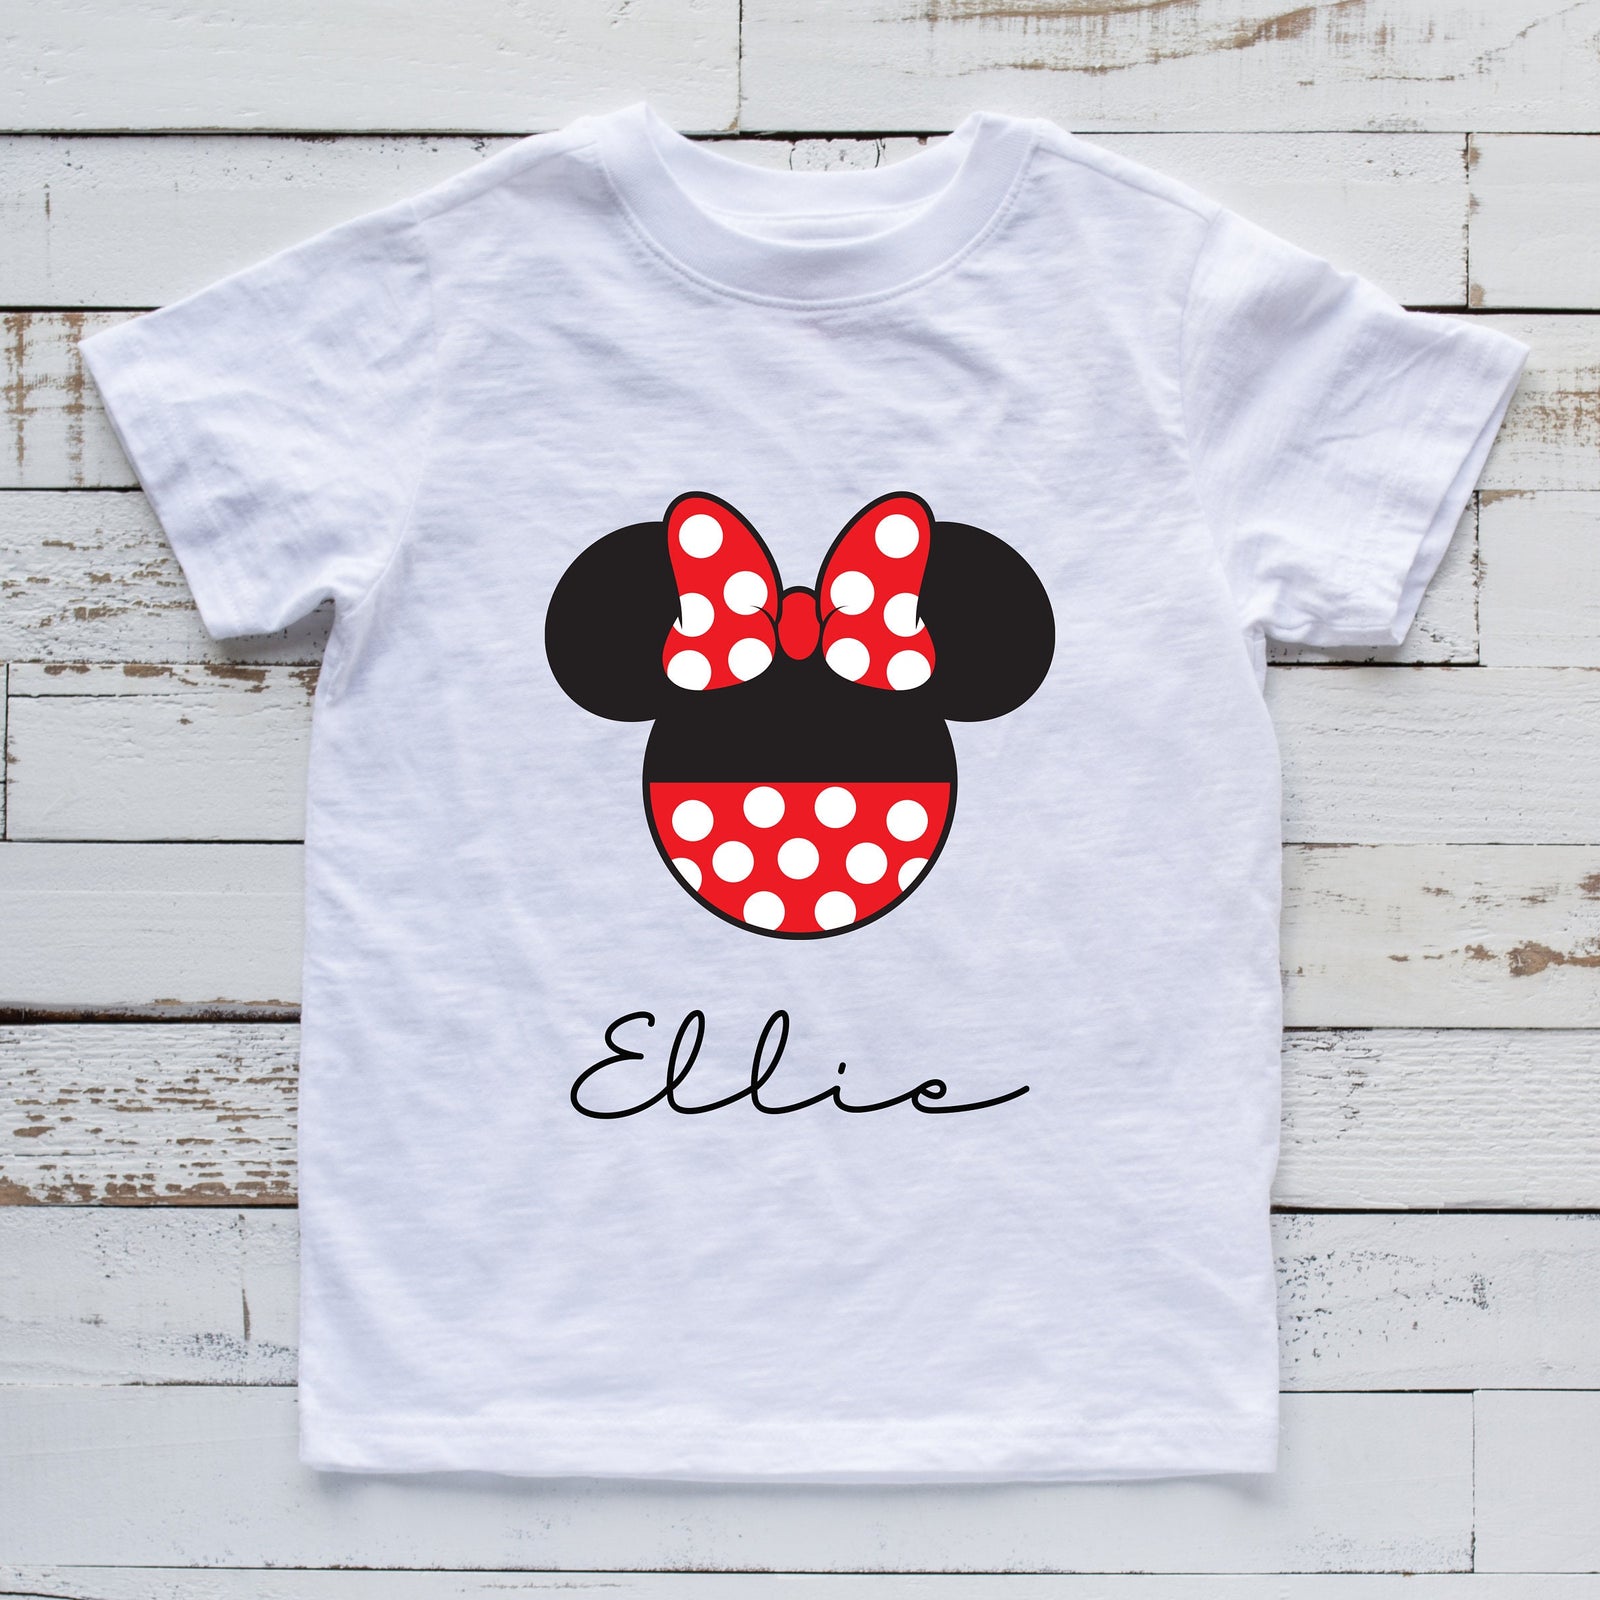 Personalized Minnie Mouse Disney T shirt -Infant Toddler and Youth - Matching Family Shirts